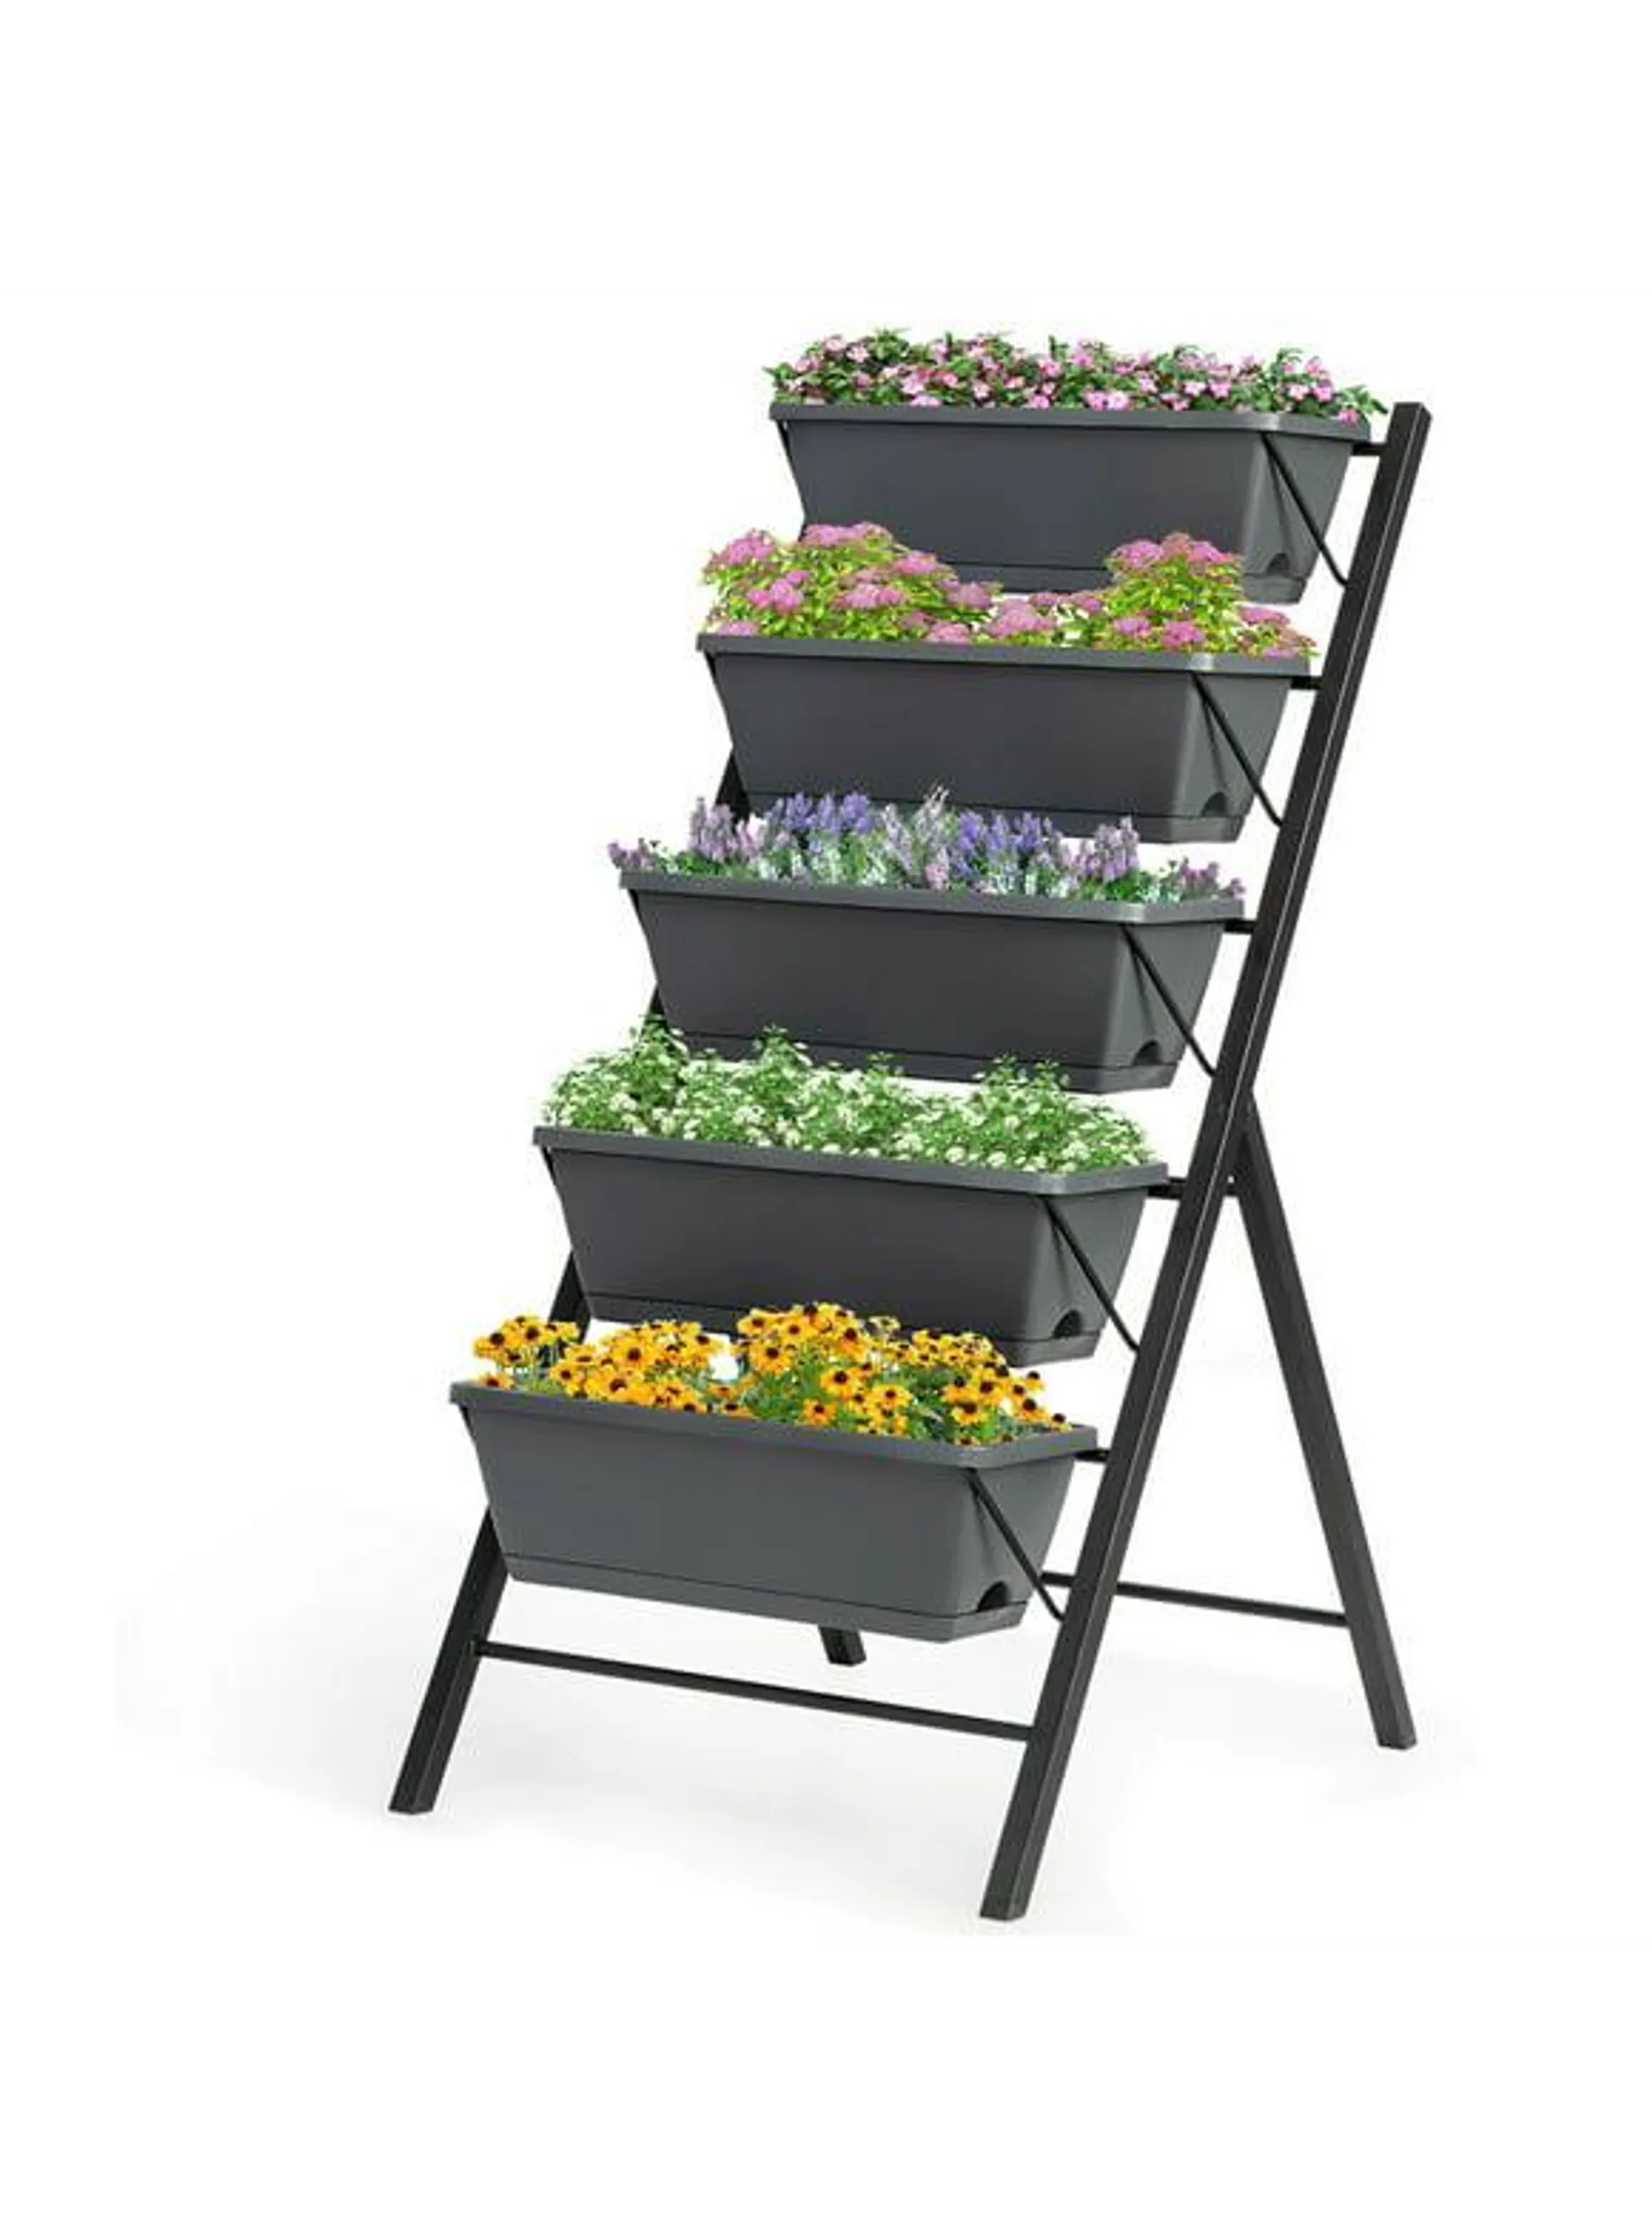 Costway 4 ft Vertical Raised Garden Bed 5-Tier Planter Box for Patio Balcony Flower Herb